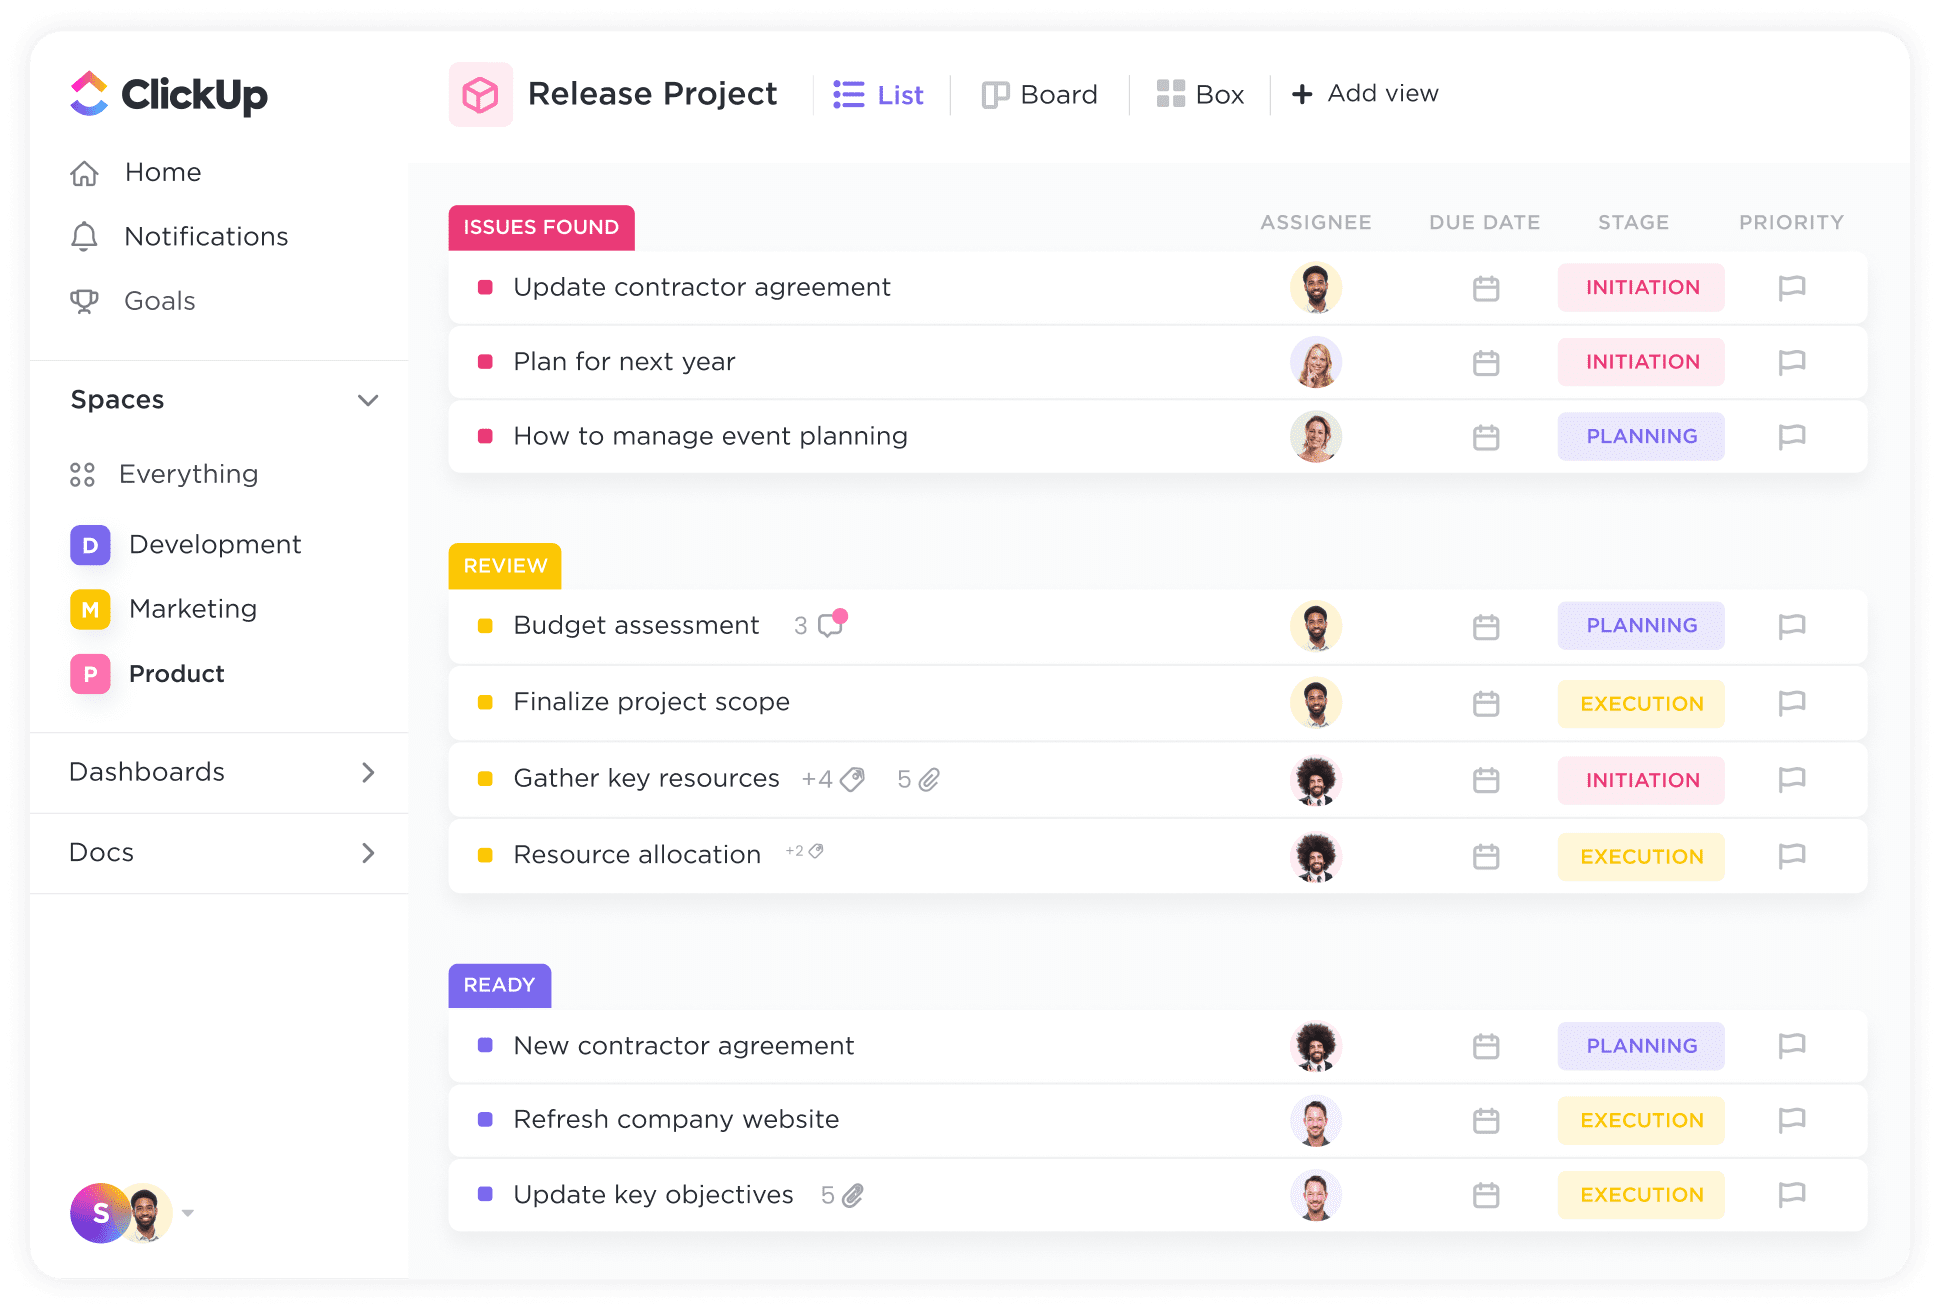 Manage all your resources in one place.